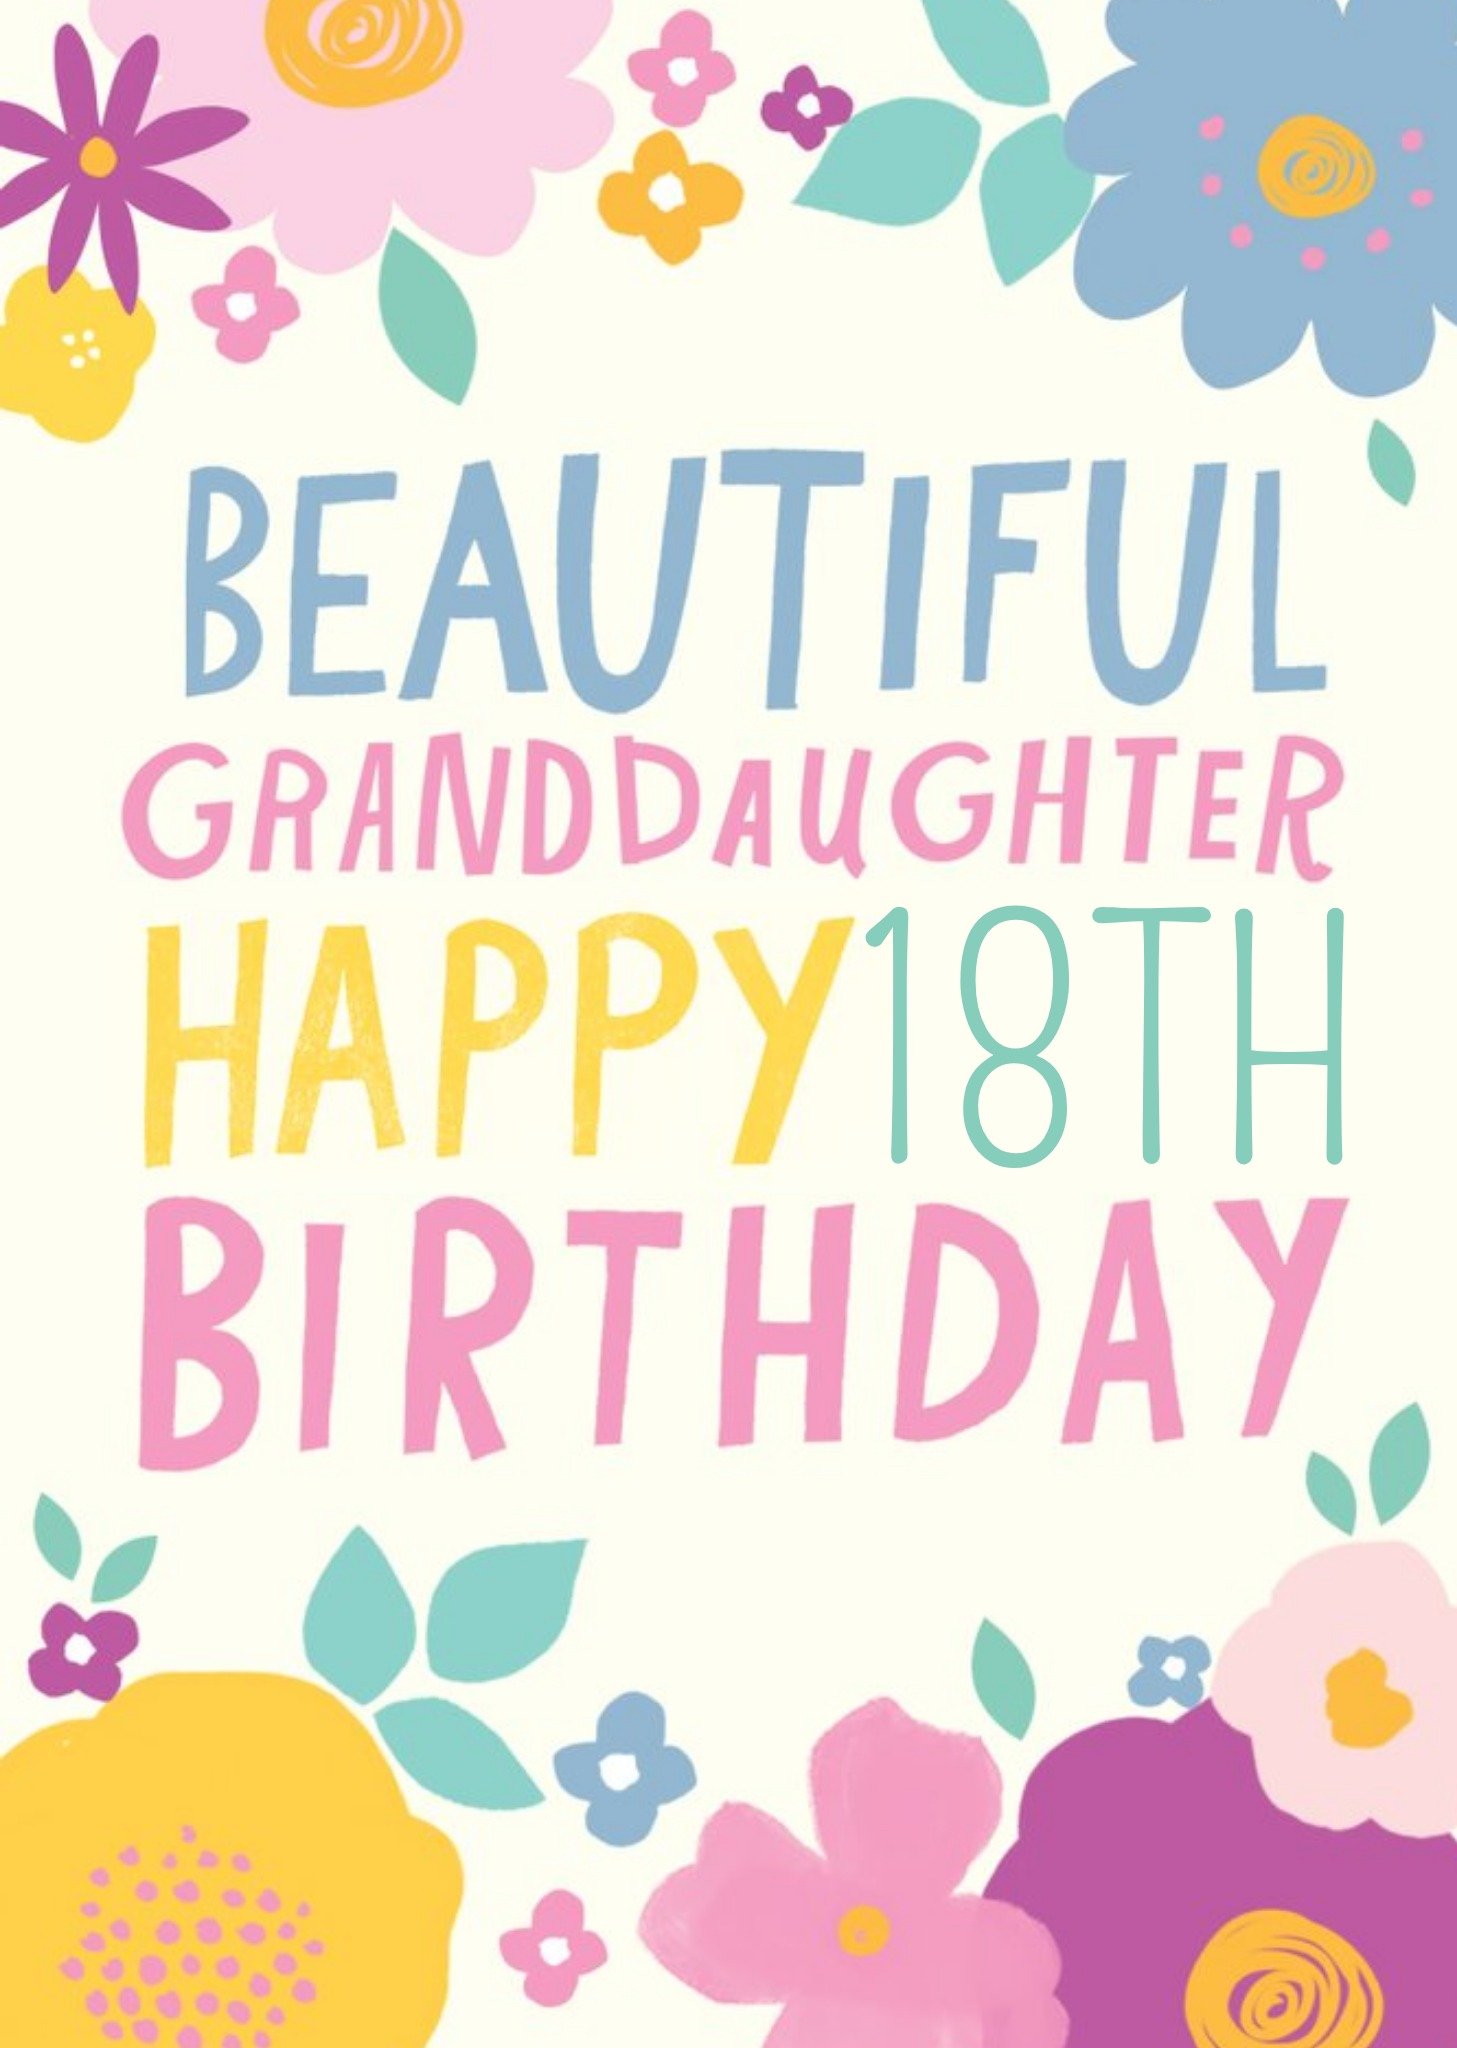 Moonpig Pigment - Bright Bold Floral Typographic Happy 18th Birthday Granddaughter Card Ecard